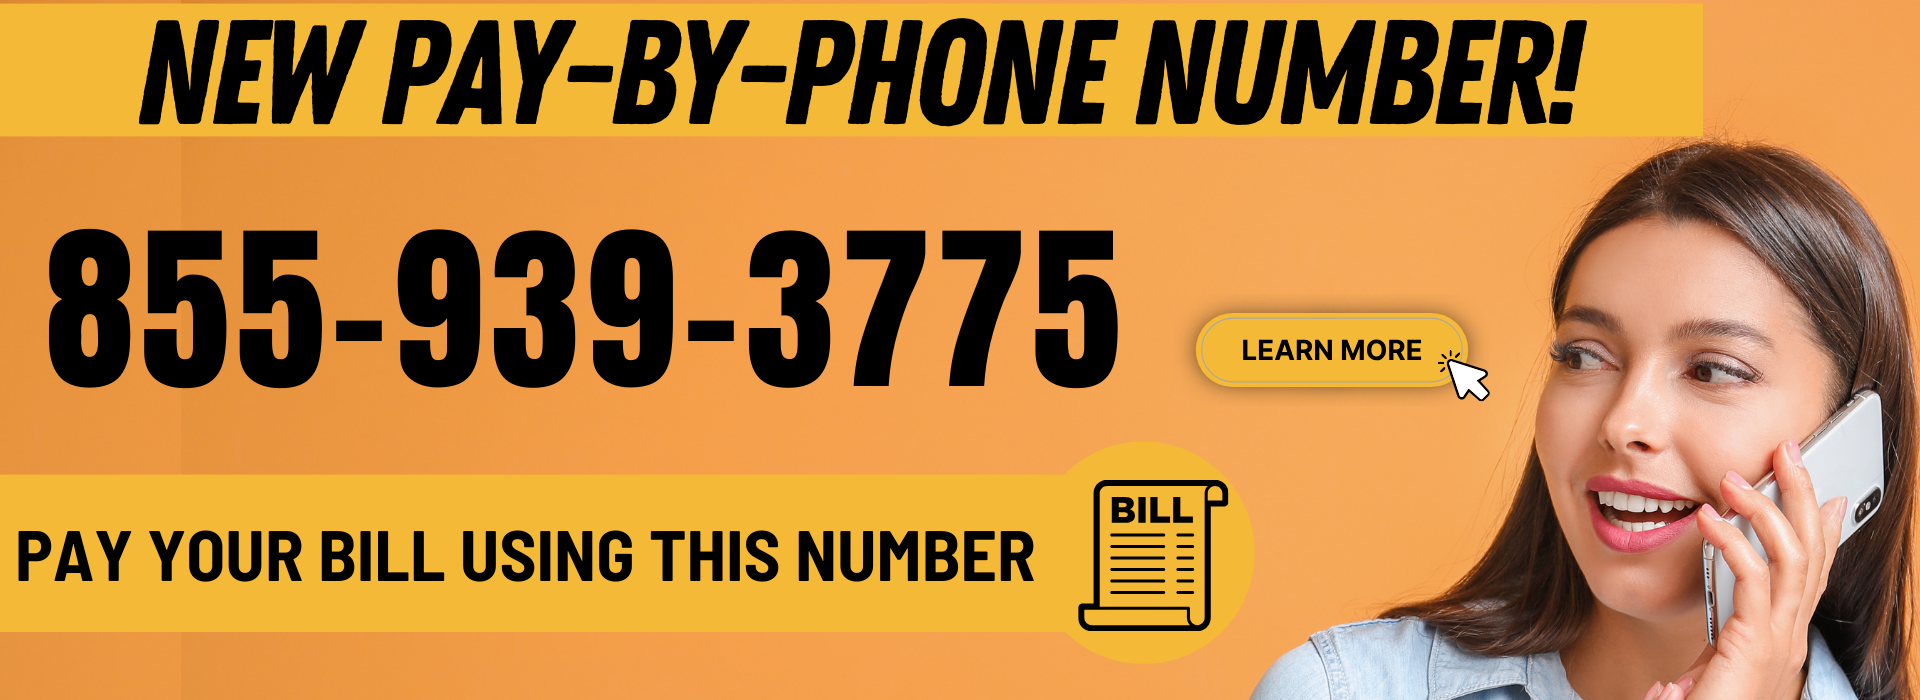 We’re getting a new pay by phone number 855-939-3775